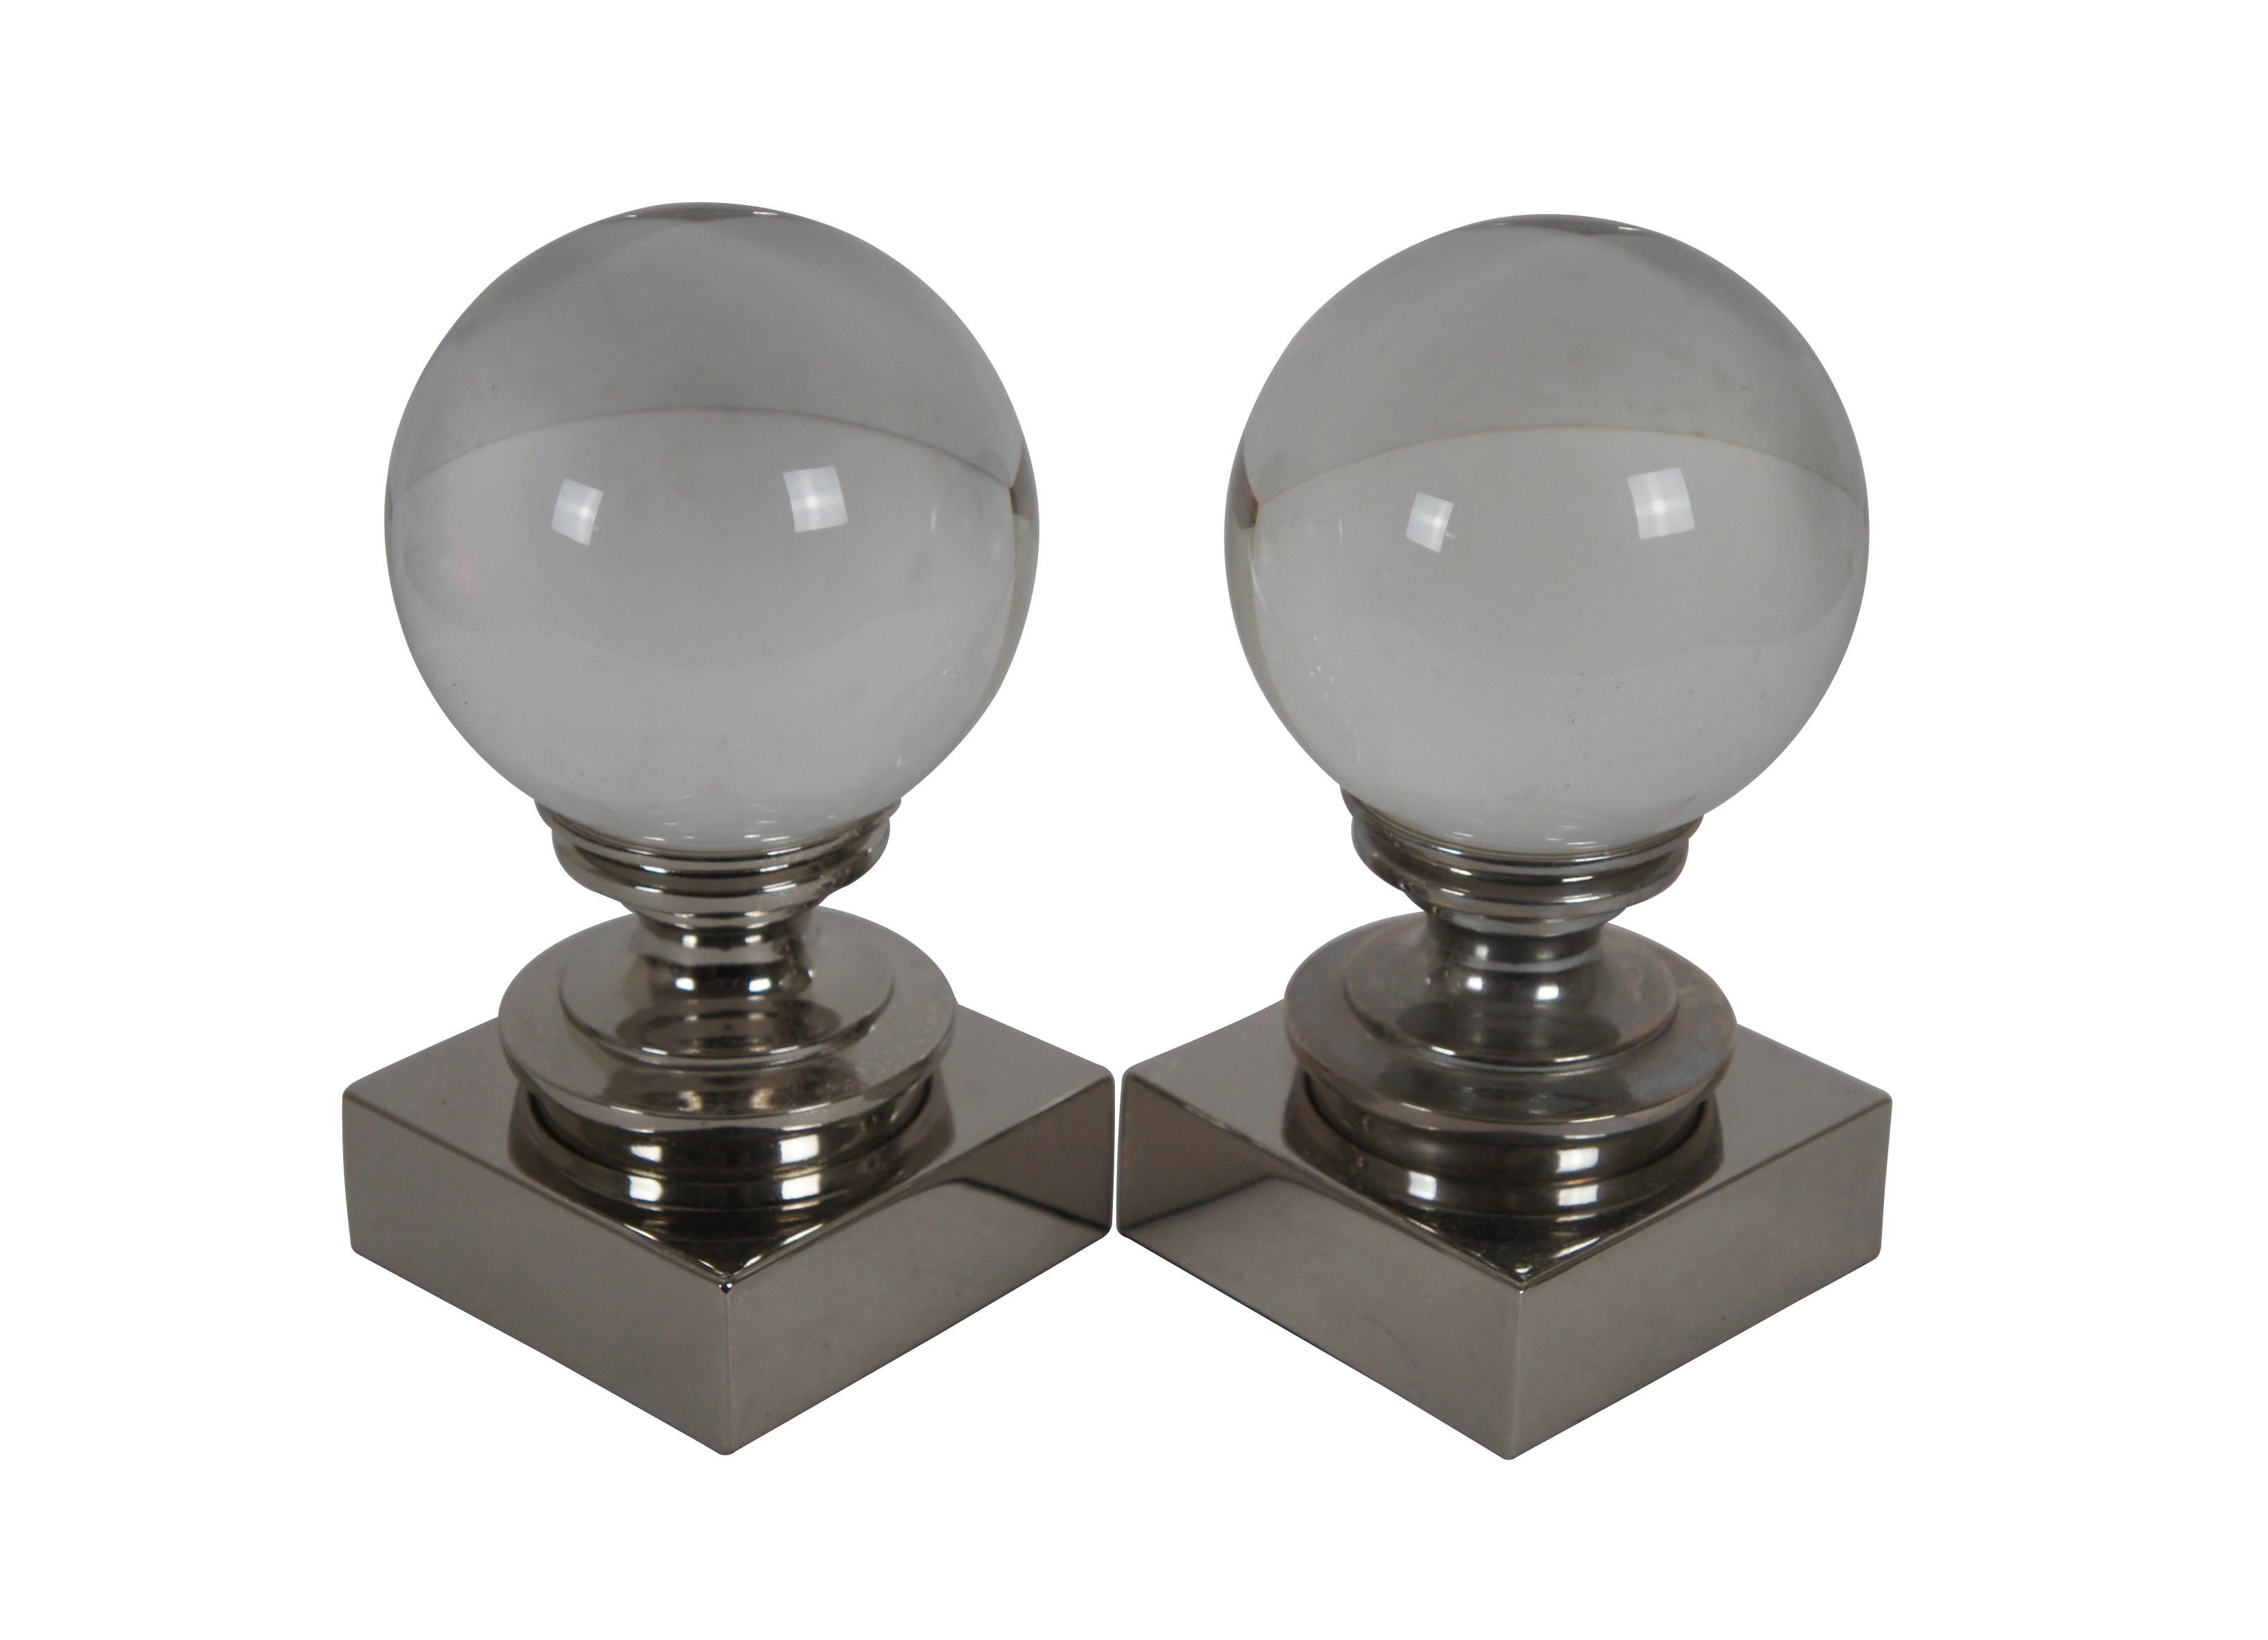 Pair of Restoration Hardware bookends / paperweights, featuring a clear crystal ball perched on a chrome finished turned pedestal. 

Dimensions:
3.5